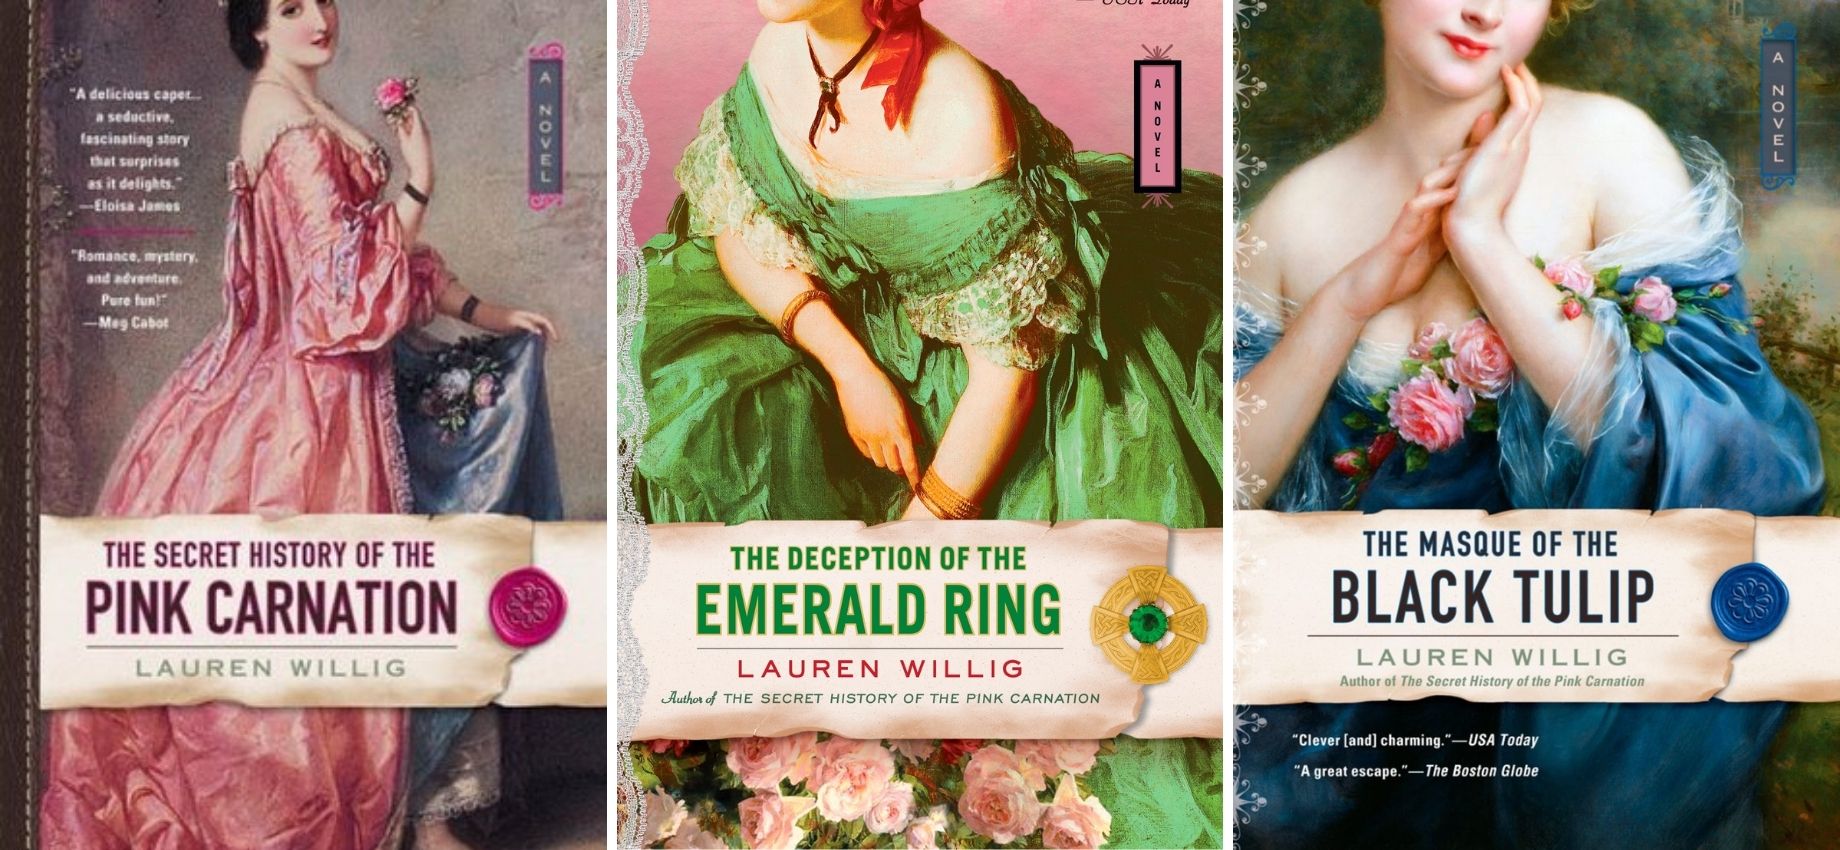 The 'Pink Carnation' Series: Please Adapt These Books